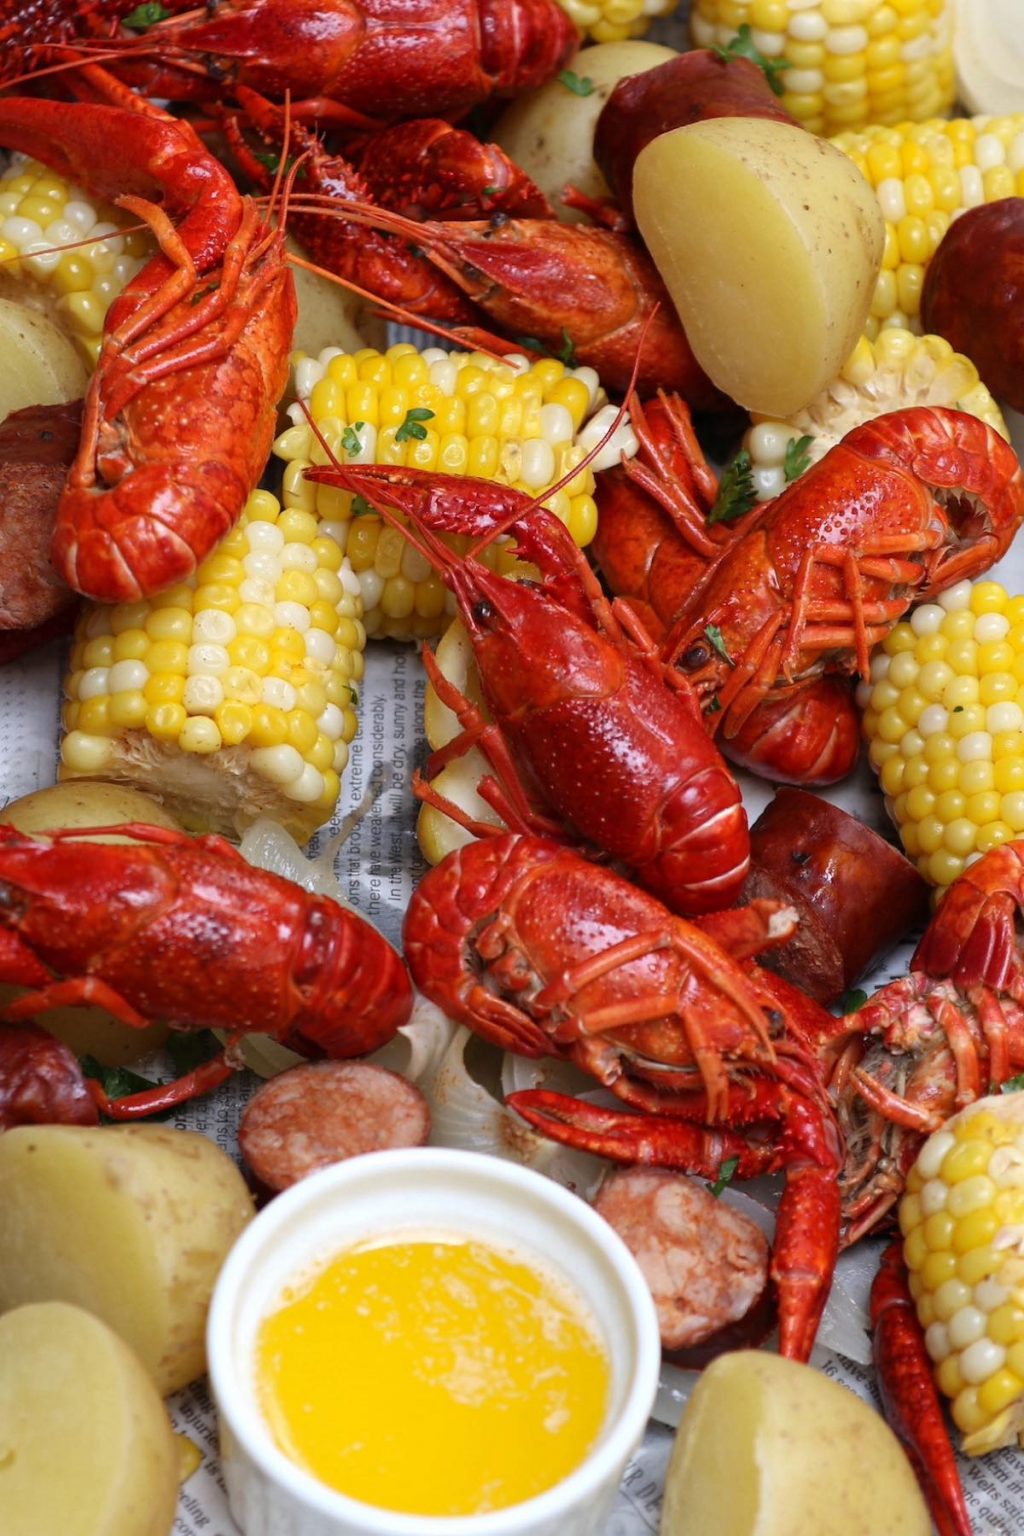 Crawfish are popular in Louisiana and a staple in Cajun cuisine. If you enjoy shellfish and haven’t tried crawfish, you’ll likely enjoy it!